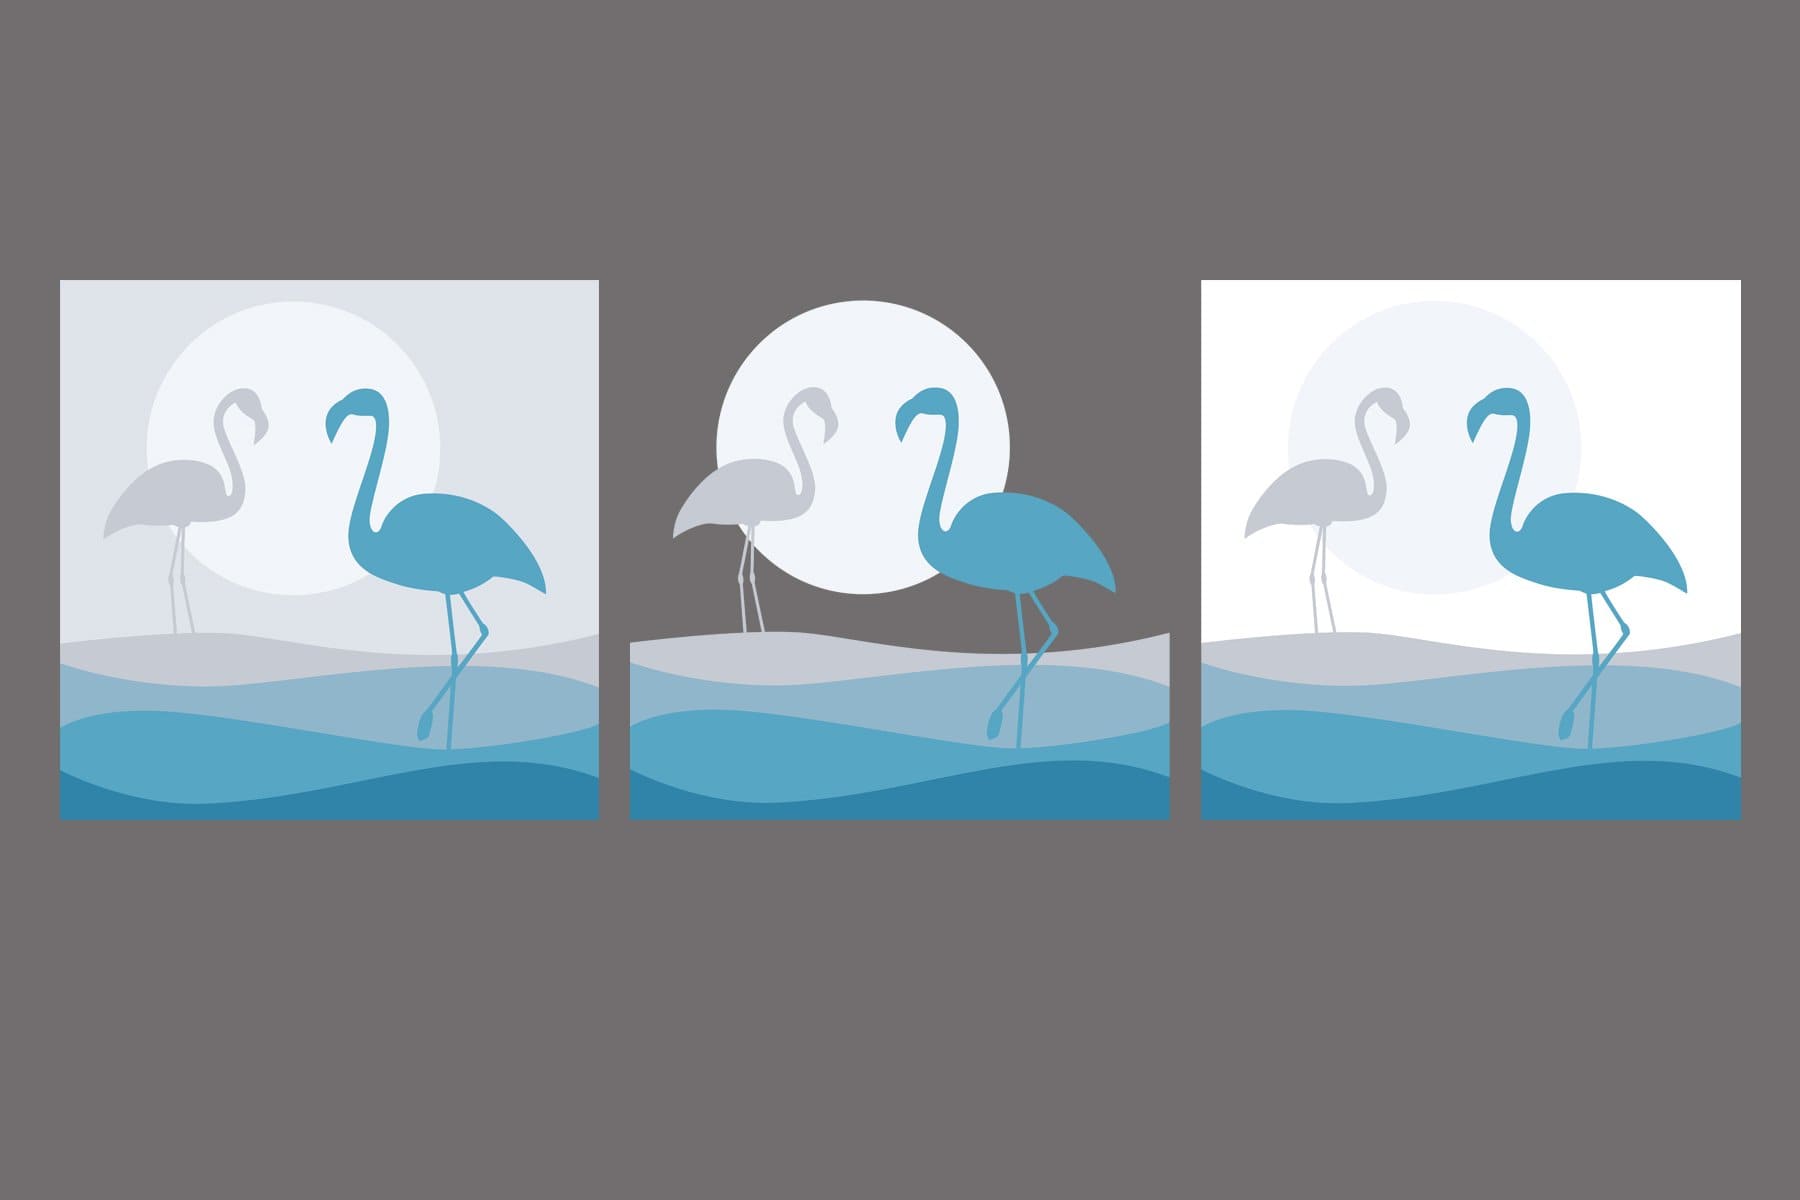 Three images of flamingos in blue and gray on a gray background.